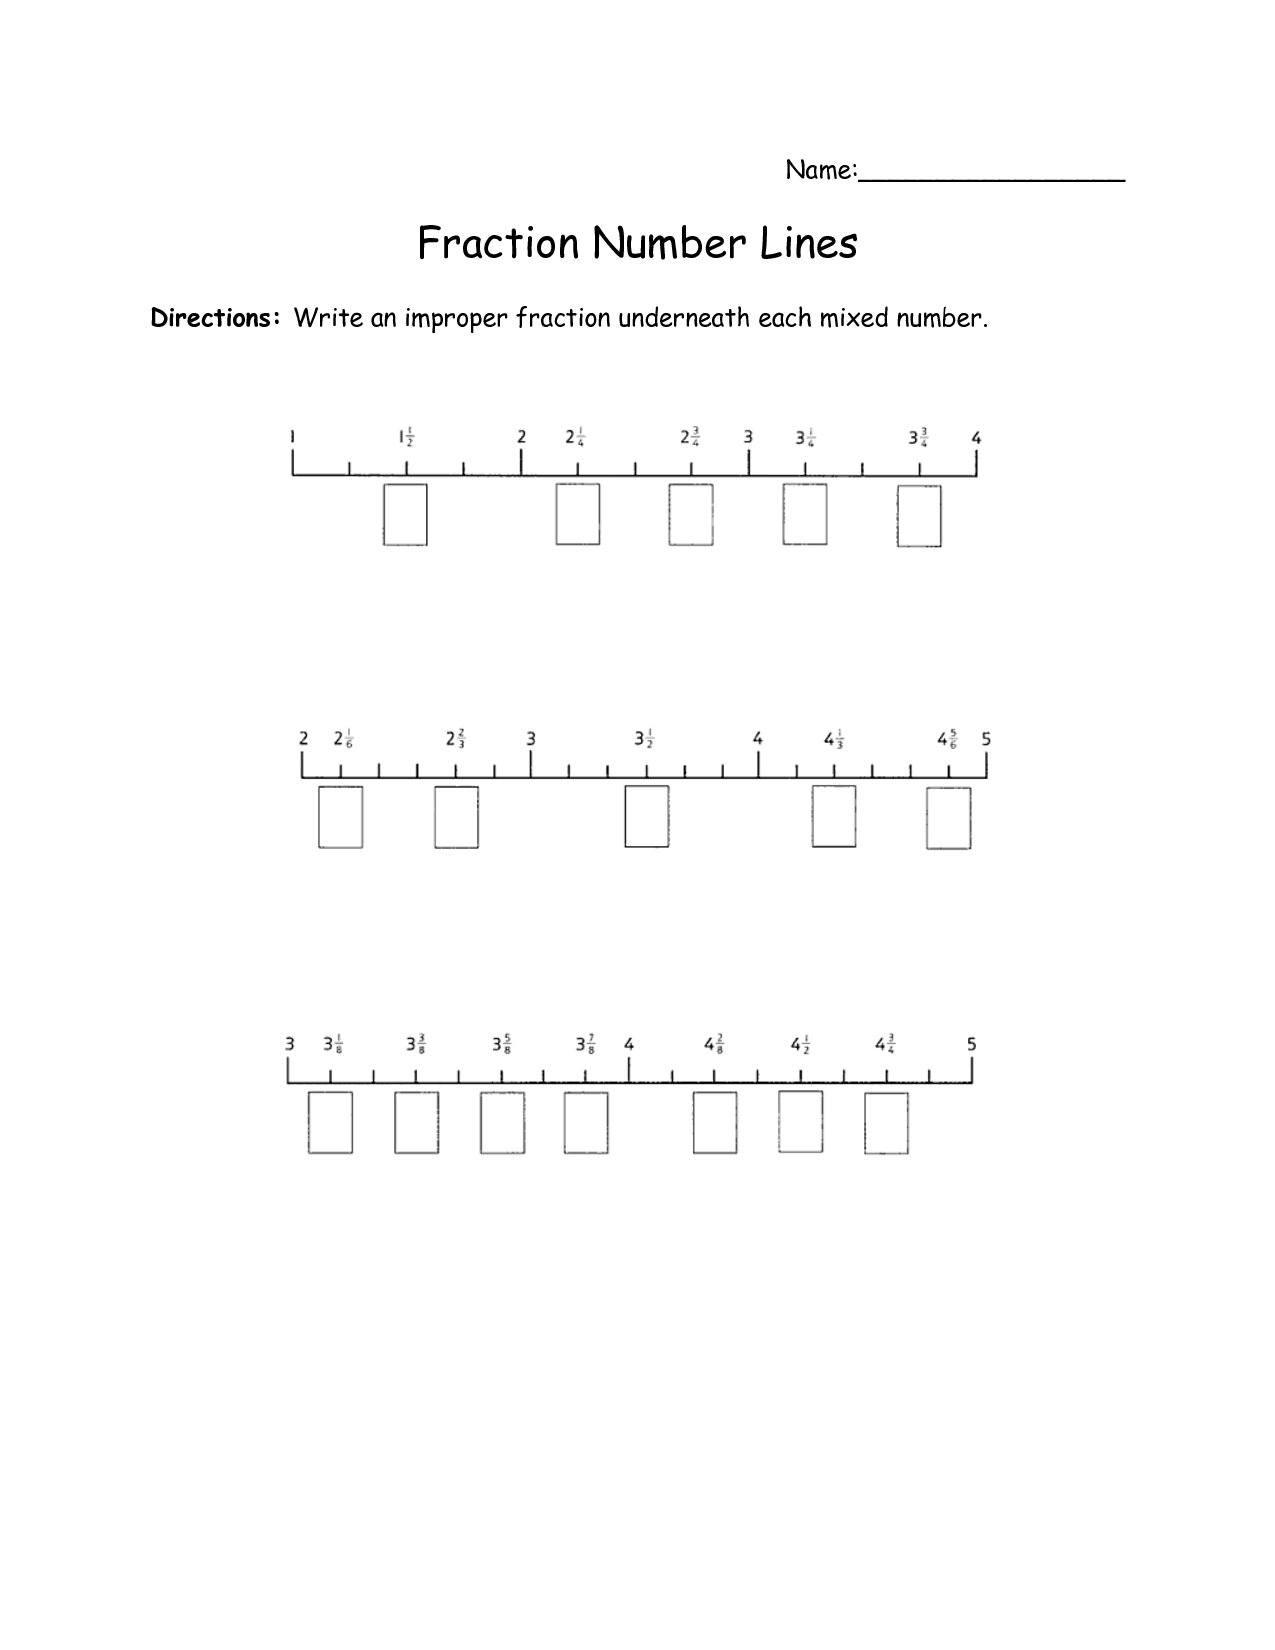 7-best-images-of-fractions-on-number-line-worksheets-math-aids-equivalent-fractions-ordering